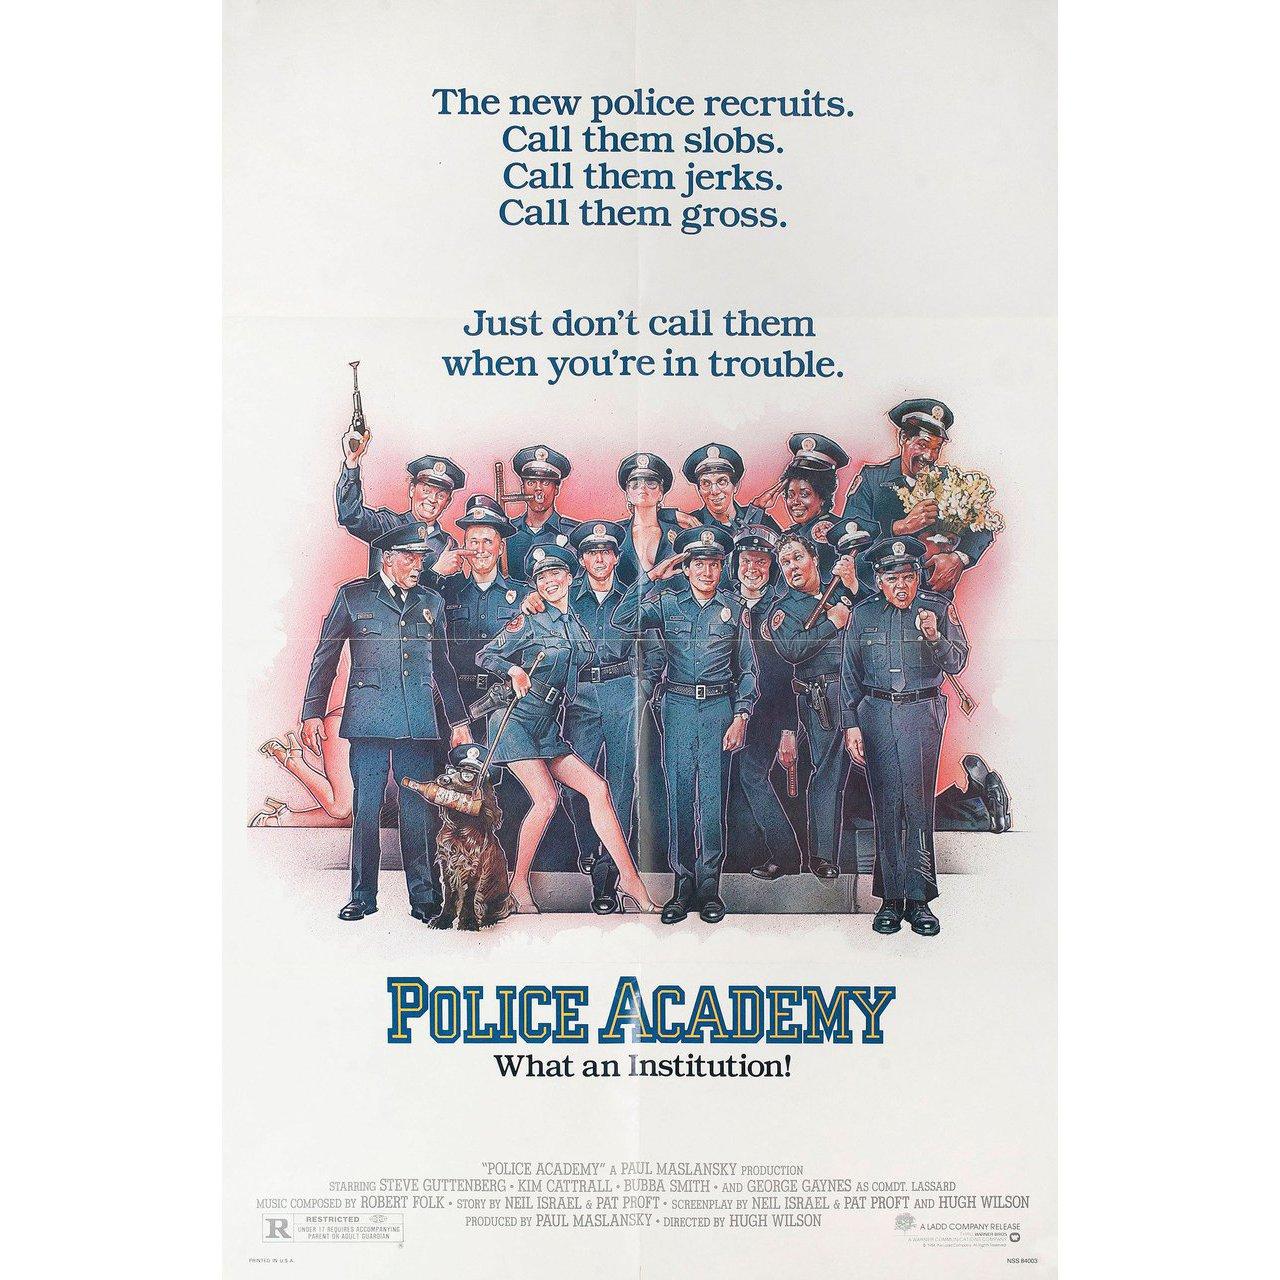 Original 1984 U.S. one sheet poster by Drew Struzan for the film Police Academy directed by Hugh Wilson with Steve Guttenberg / Kim Cattrall / G.W. Bailey / Bubba Smith. Fine condition, folded. Many original posters were issued folded or were